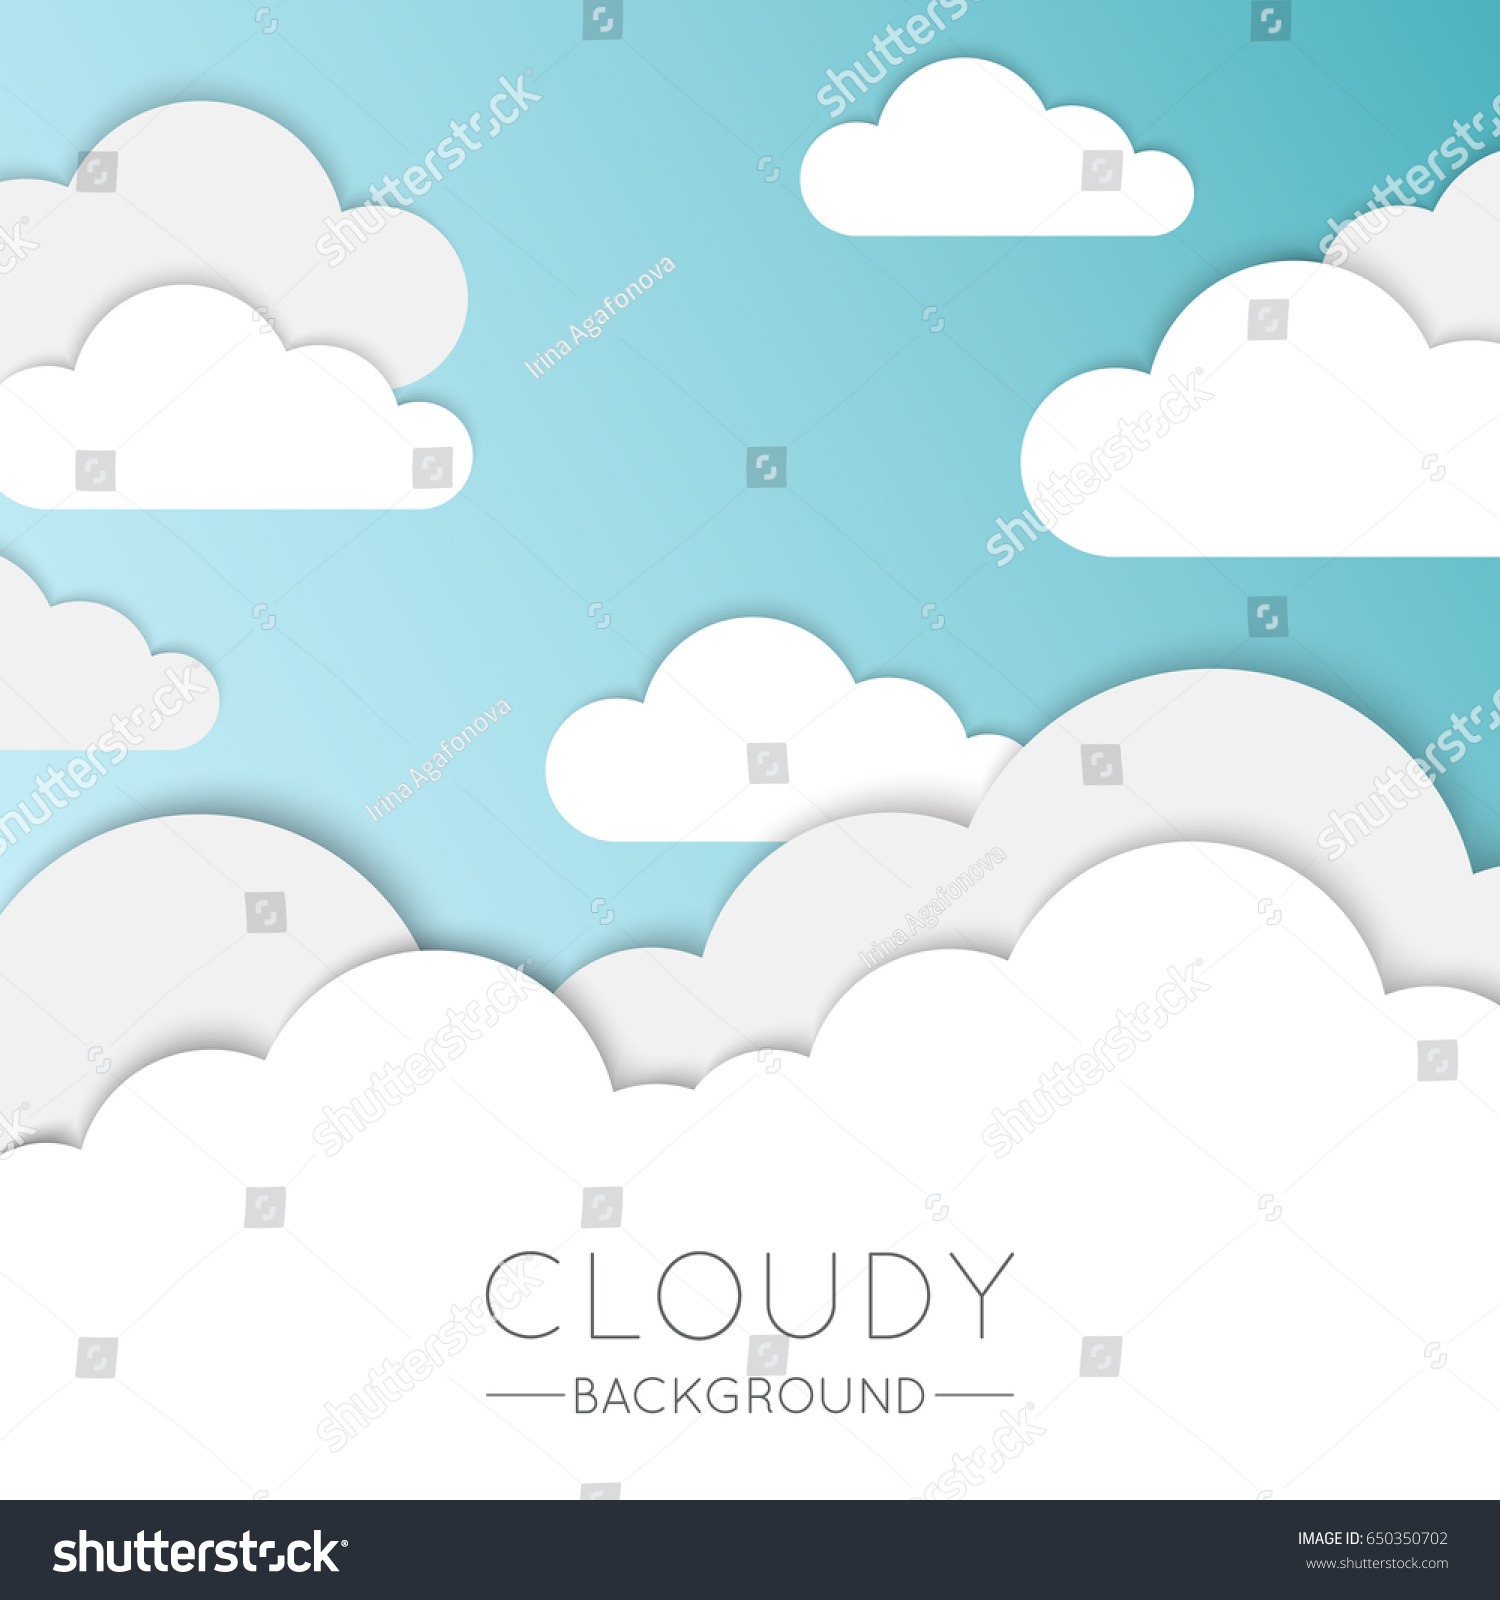 Blue Sky Clouds Cartoon Paper Background Stock Vector Royalty Free 650350702 Shutterstock 4988